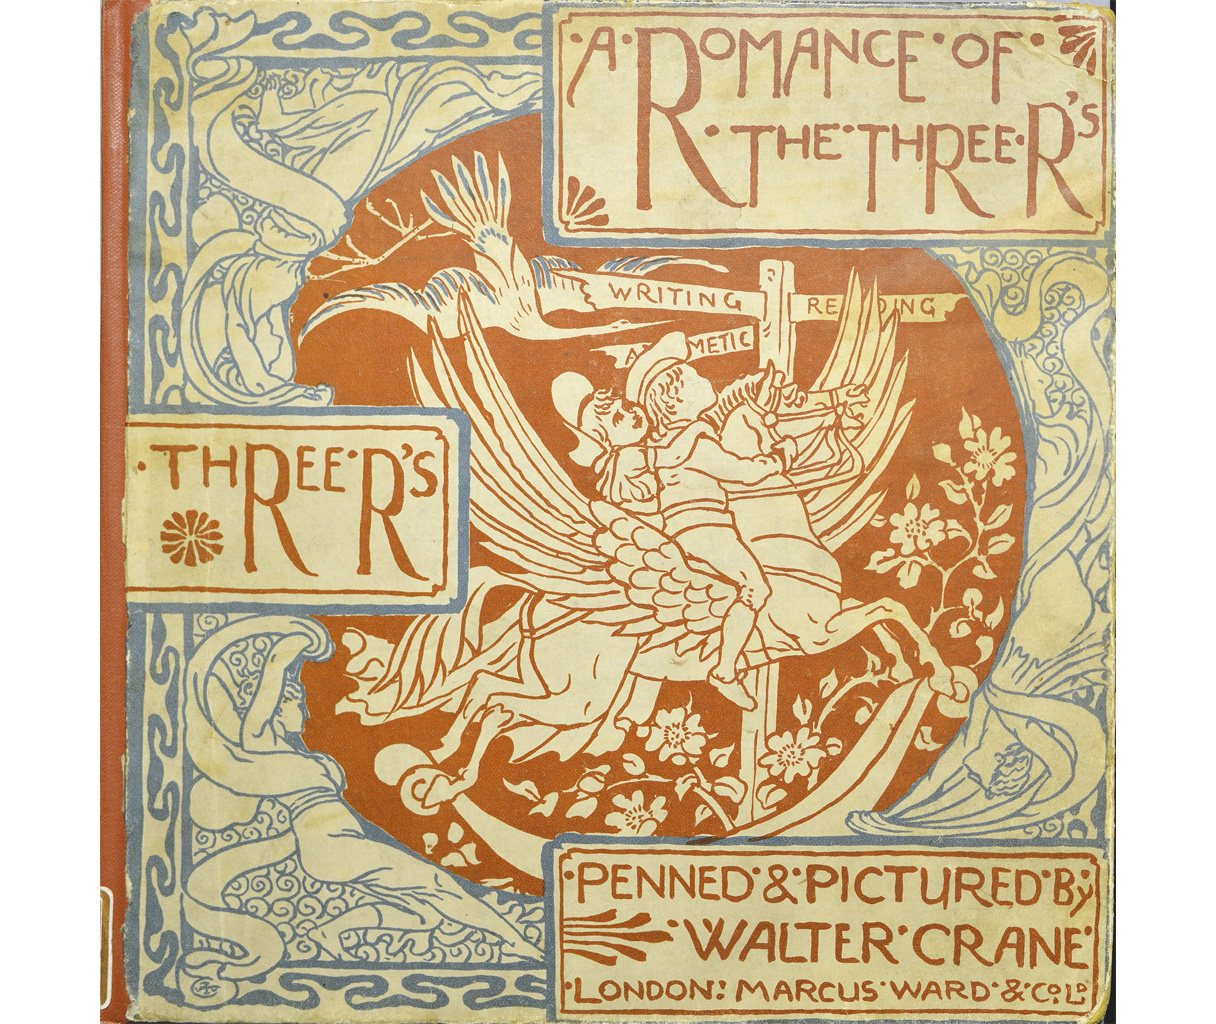 Exhibit Materials of A romance of the three Rs (Walter Crane's picture books. New series ; no. 1-3)